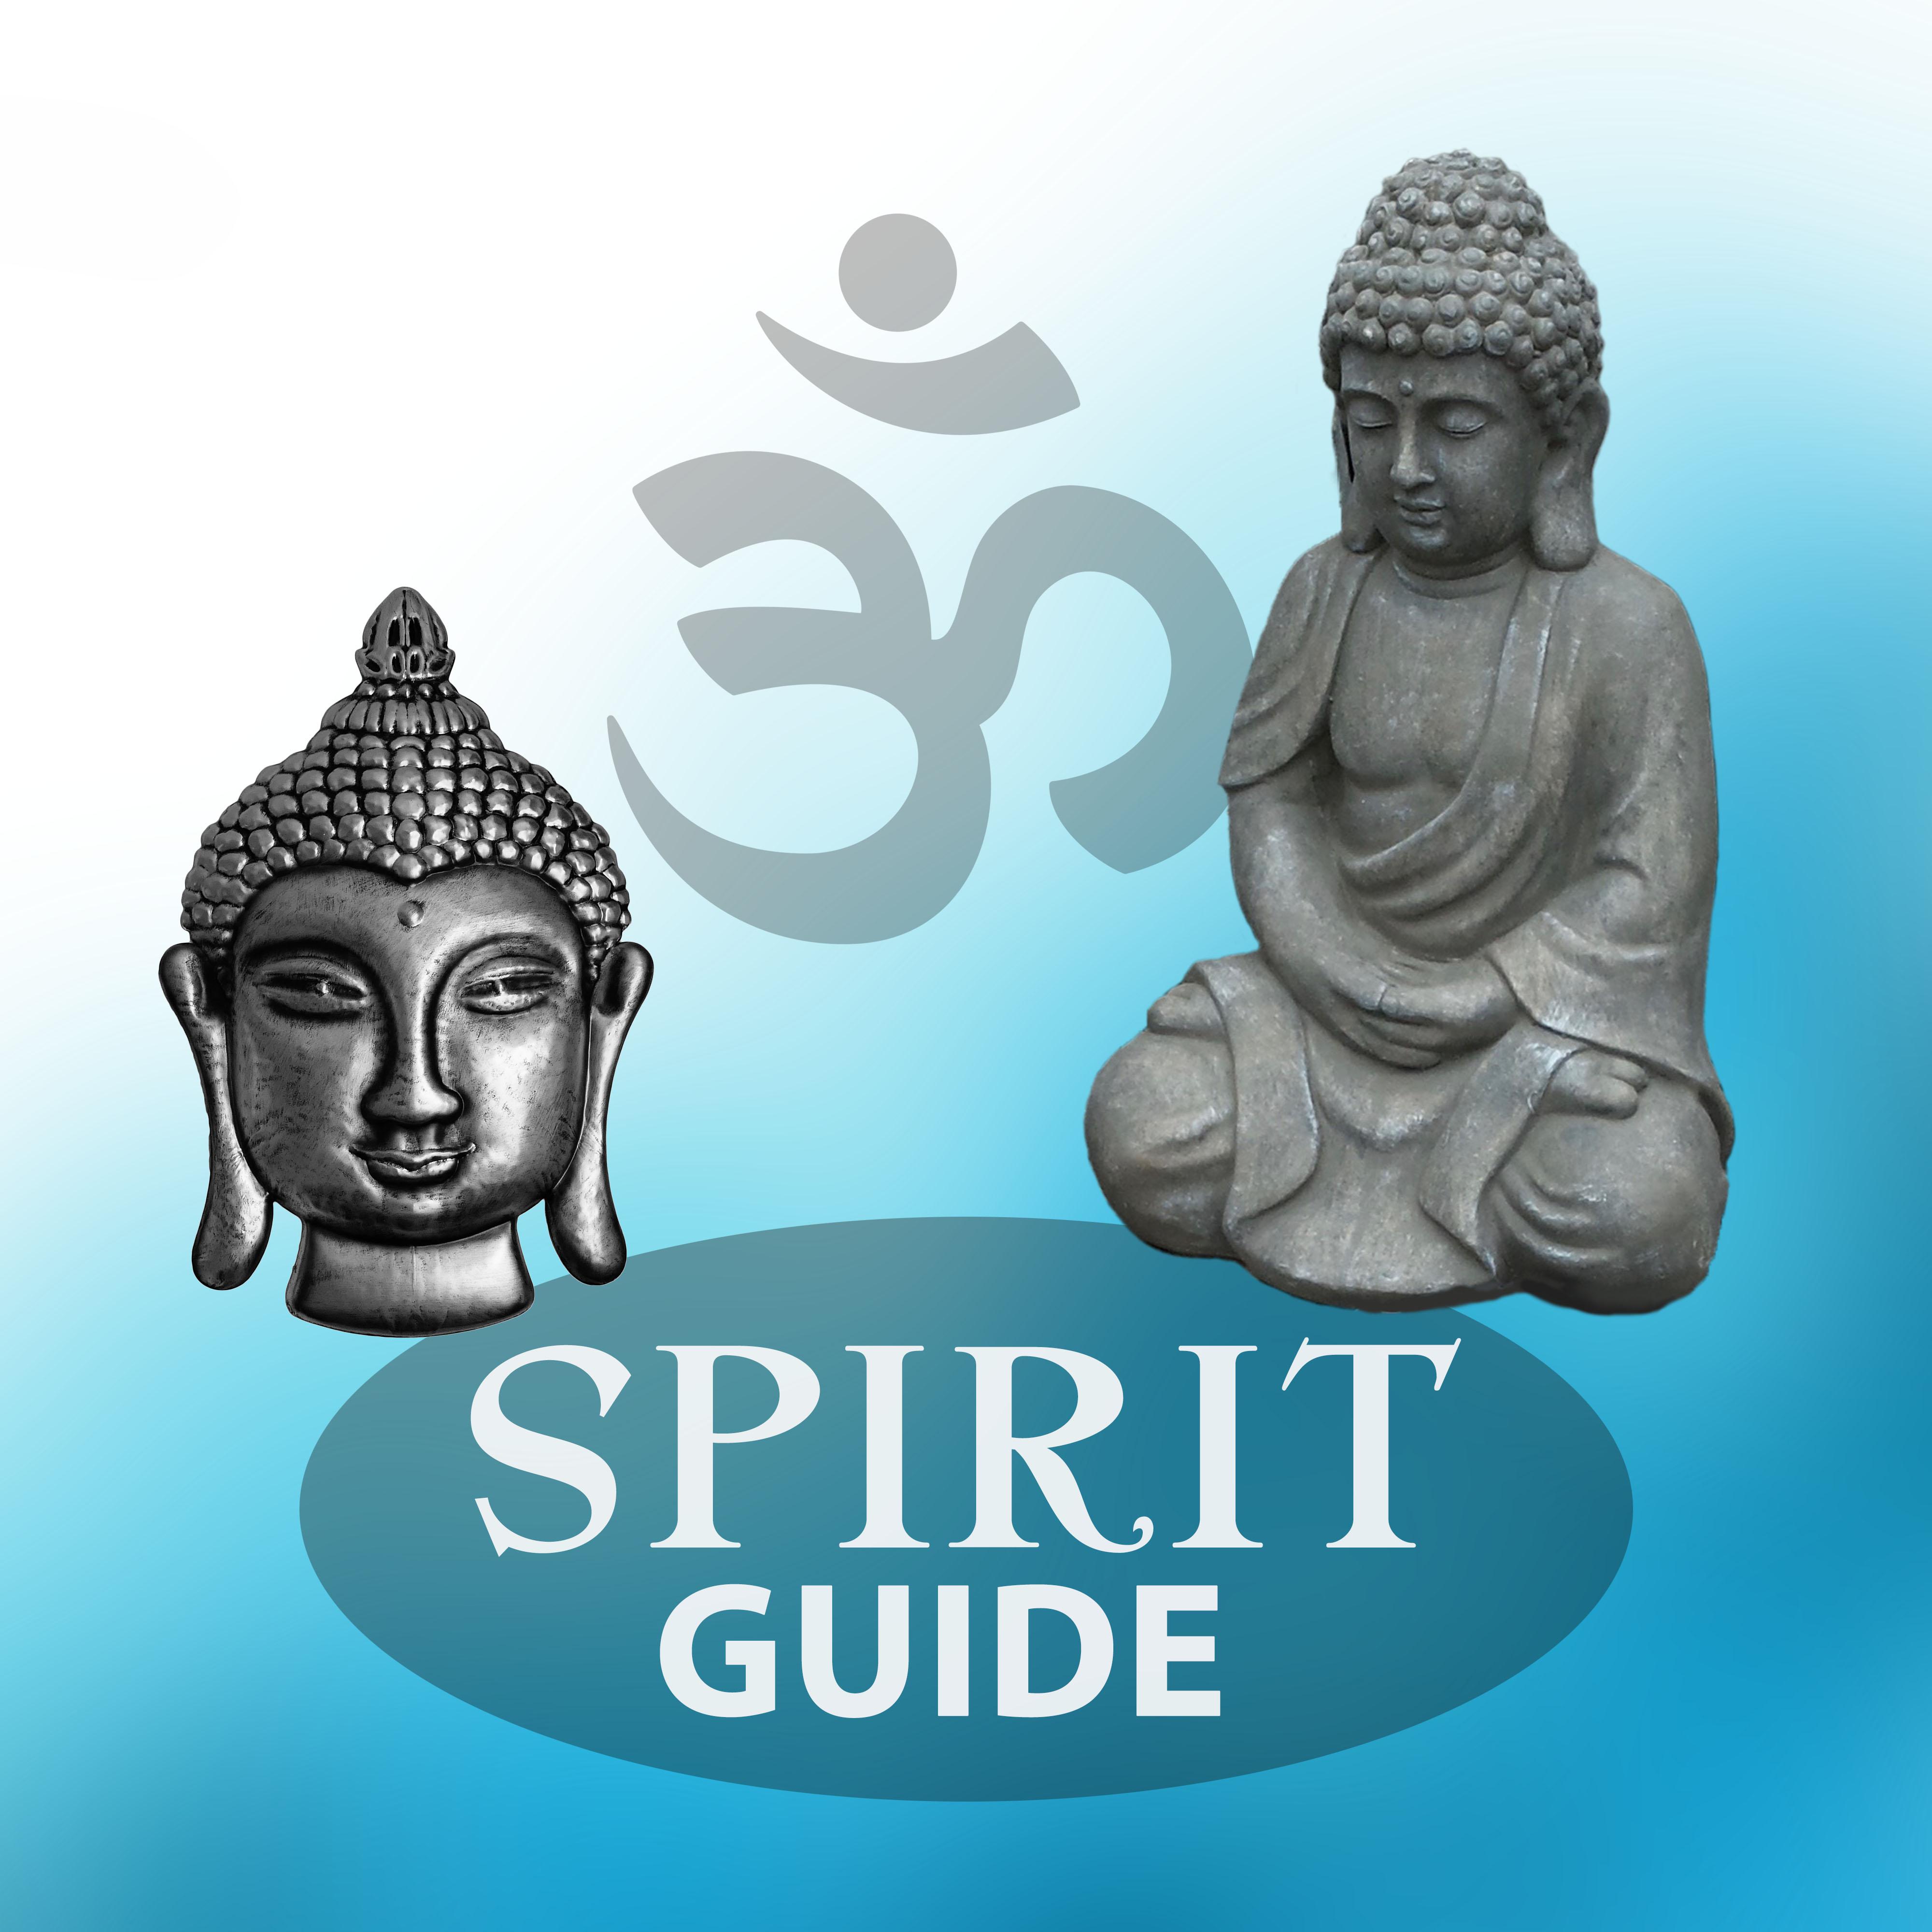 Spirit Guide – Meditation Music, New Age Sounds, Spirit Calmness, Nature Sounds, Chill All Day